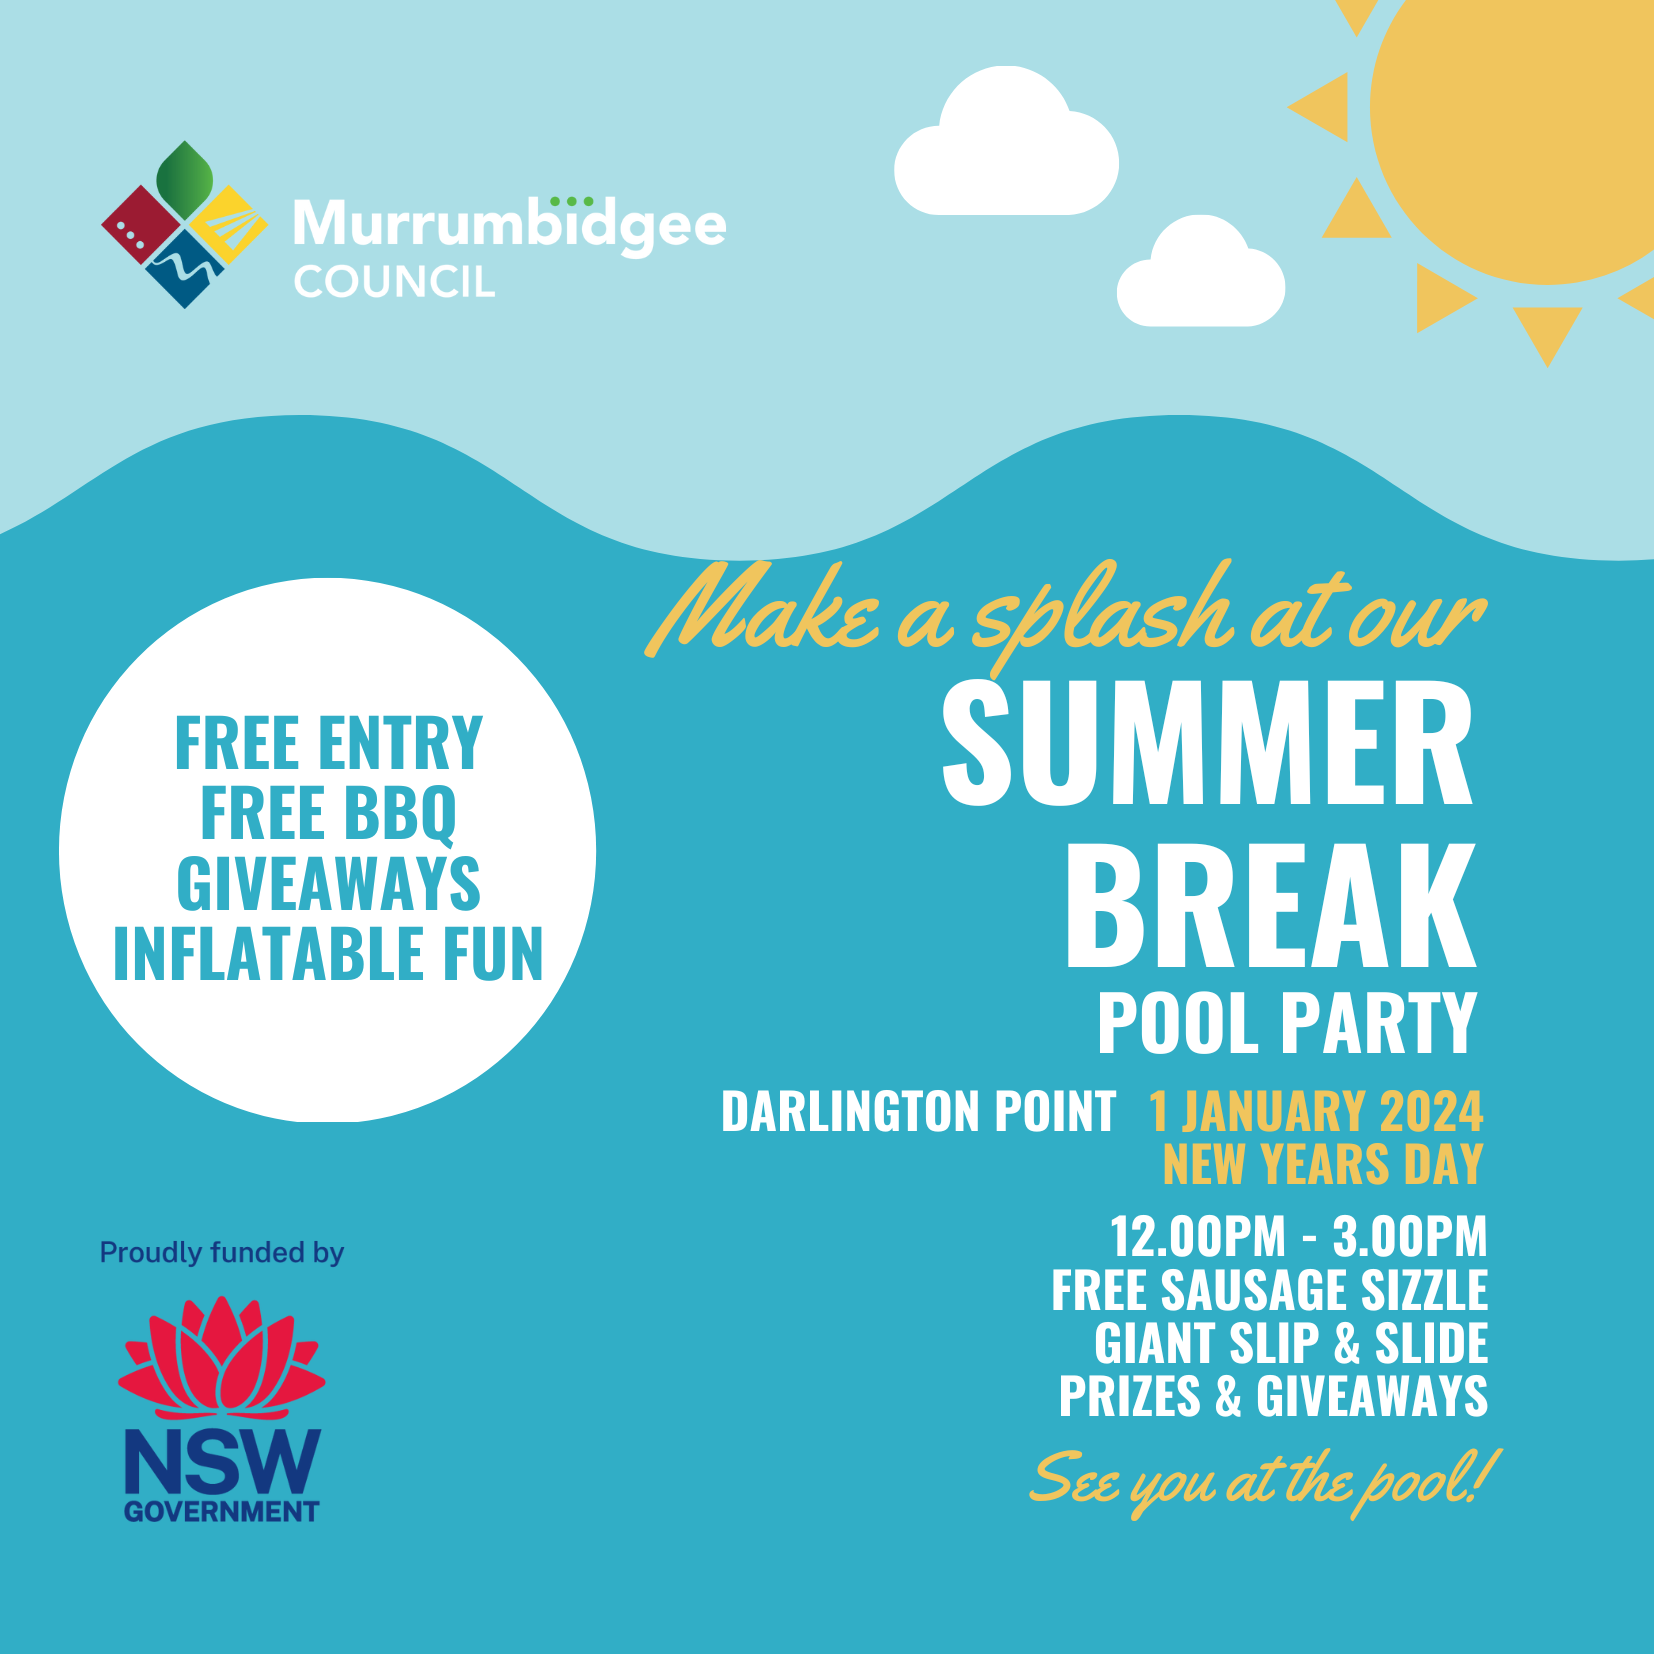 Darlington Point Summer Break New Years Day Pool Party